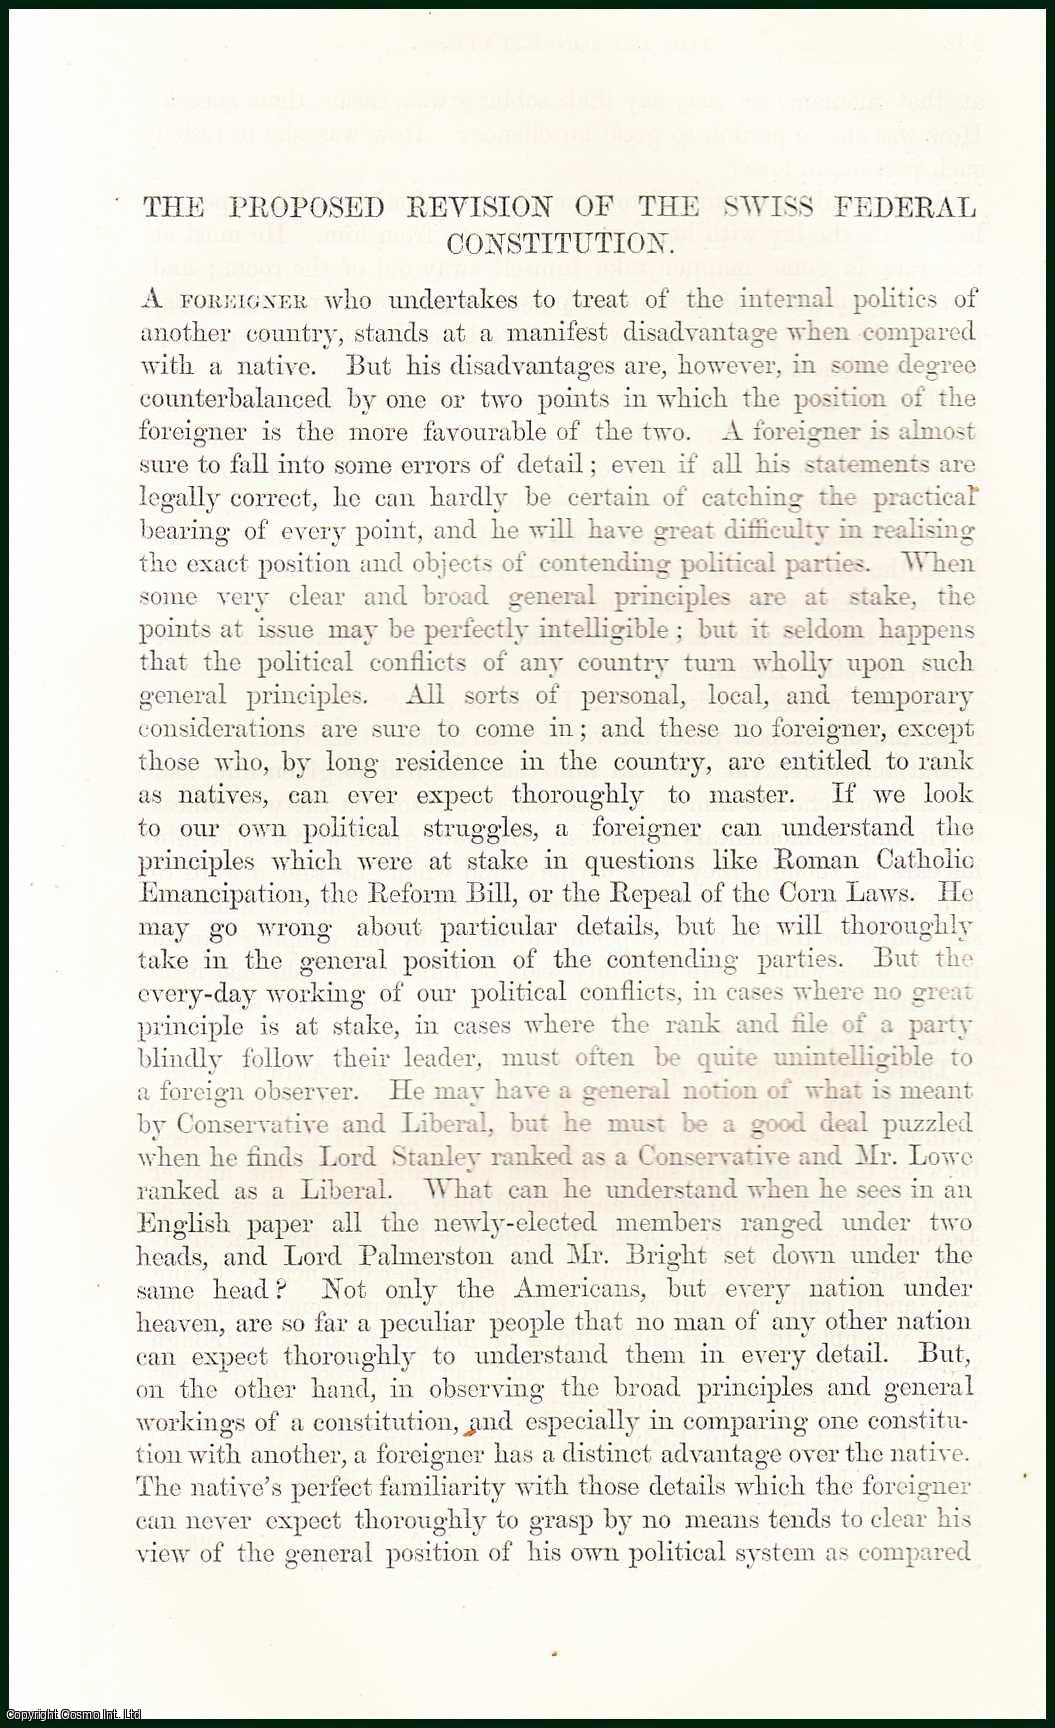 Edward A. Freeman - The Proposed Revision of The Swiss Federal Constitution : A Foreigner who undertakes to treat of the internal Politics of another Country, stands at a manifest disadvantage when compared with a native. An uncommon original article from The Fortnightly Review, 1865.